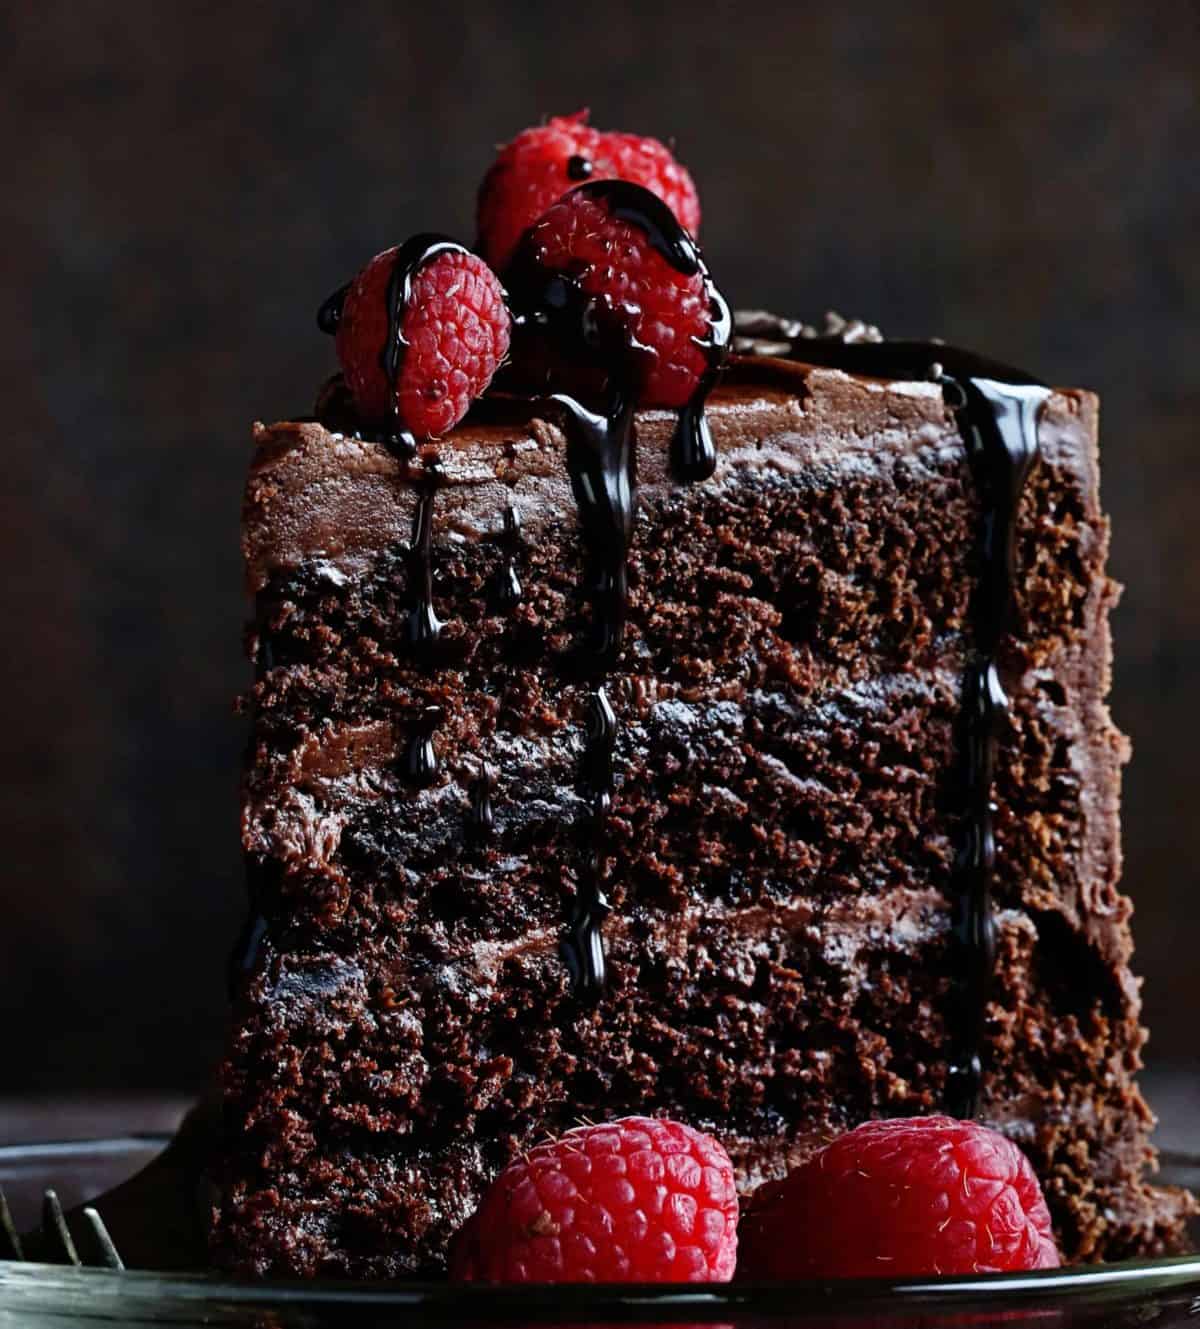 Piece of Chocolate Cake on Plate with Raspberries